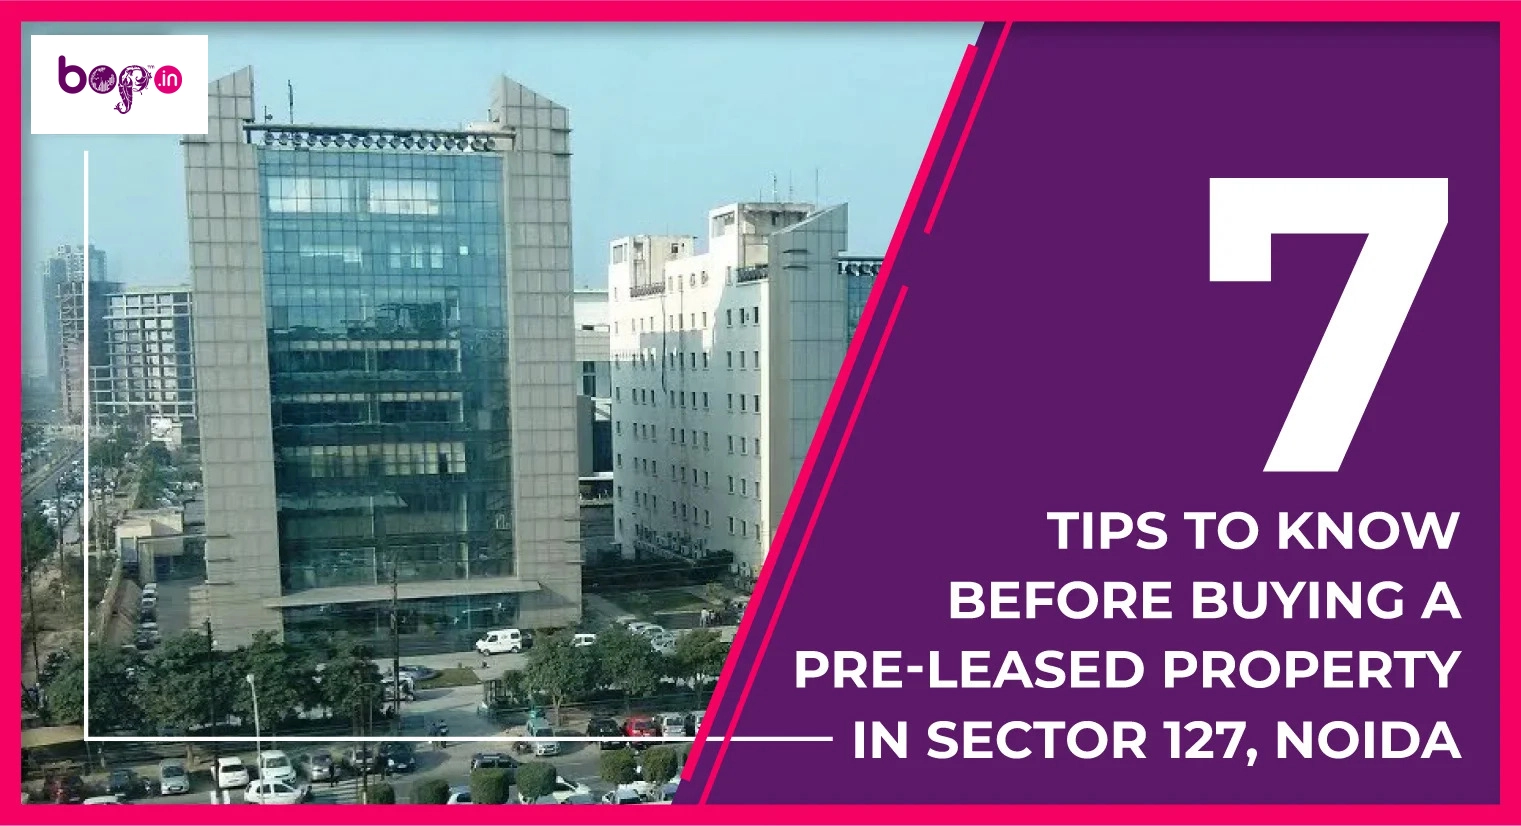 7 Tips to Know Before Buying a Pre-Leased Property in Sector 127, Noida